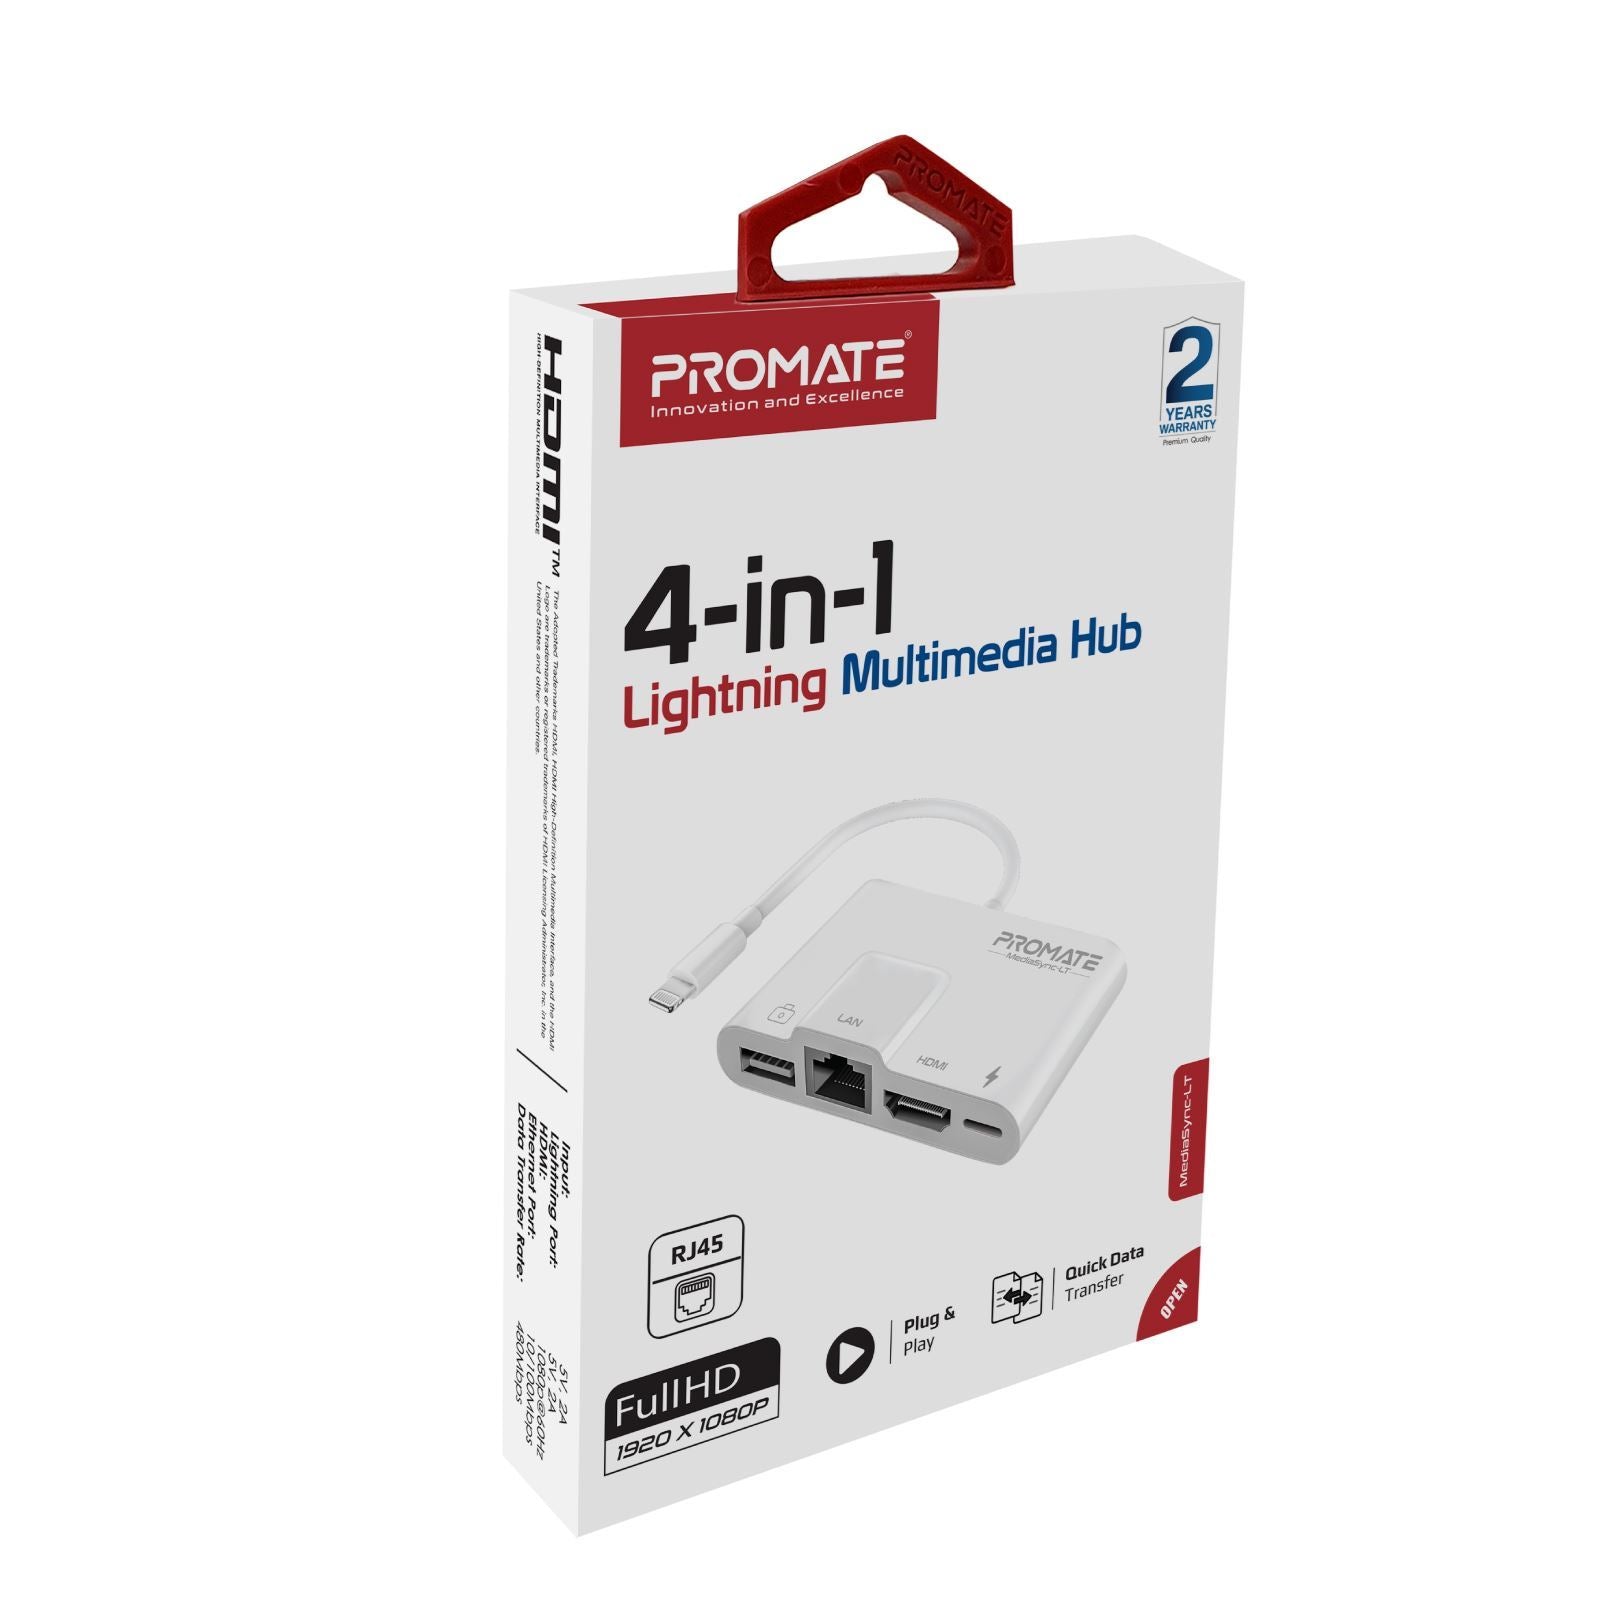 PROMATE_4-In-1_Multimedia_Hub_with_Lightning_Connector._Includes_1x_RJ45_Ethernet_Port,_1x_HDMI_Port,_1x_USB-A_Port,_1x_Lightning_Charging_Bridge._Supports_July_Sale_-_20%_OFF 1513